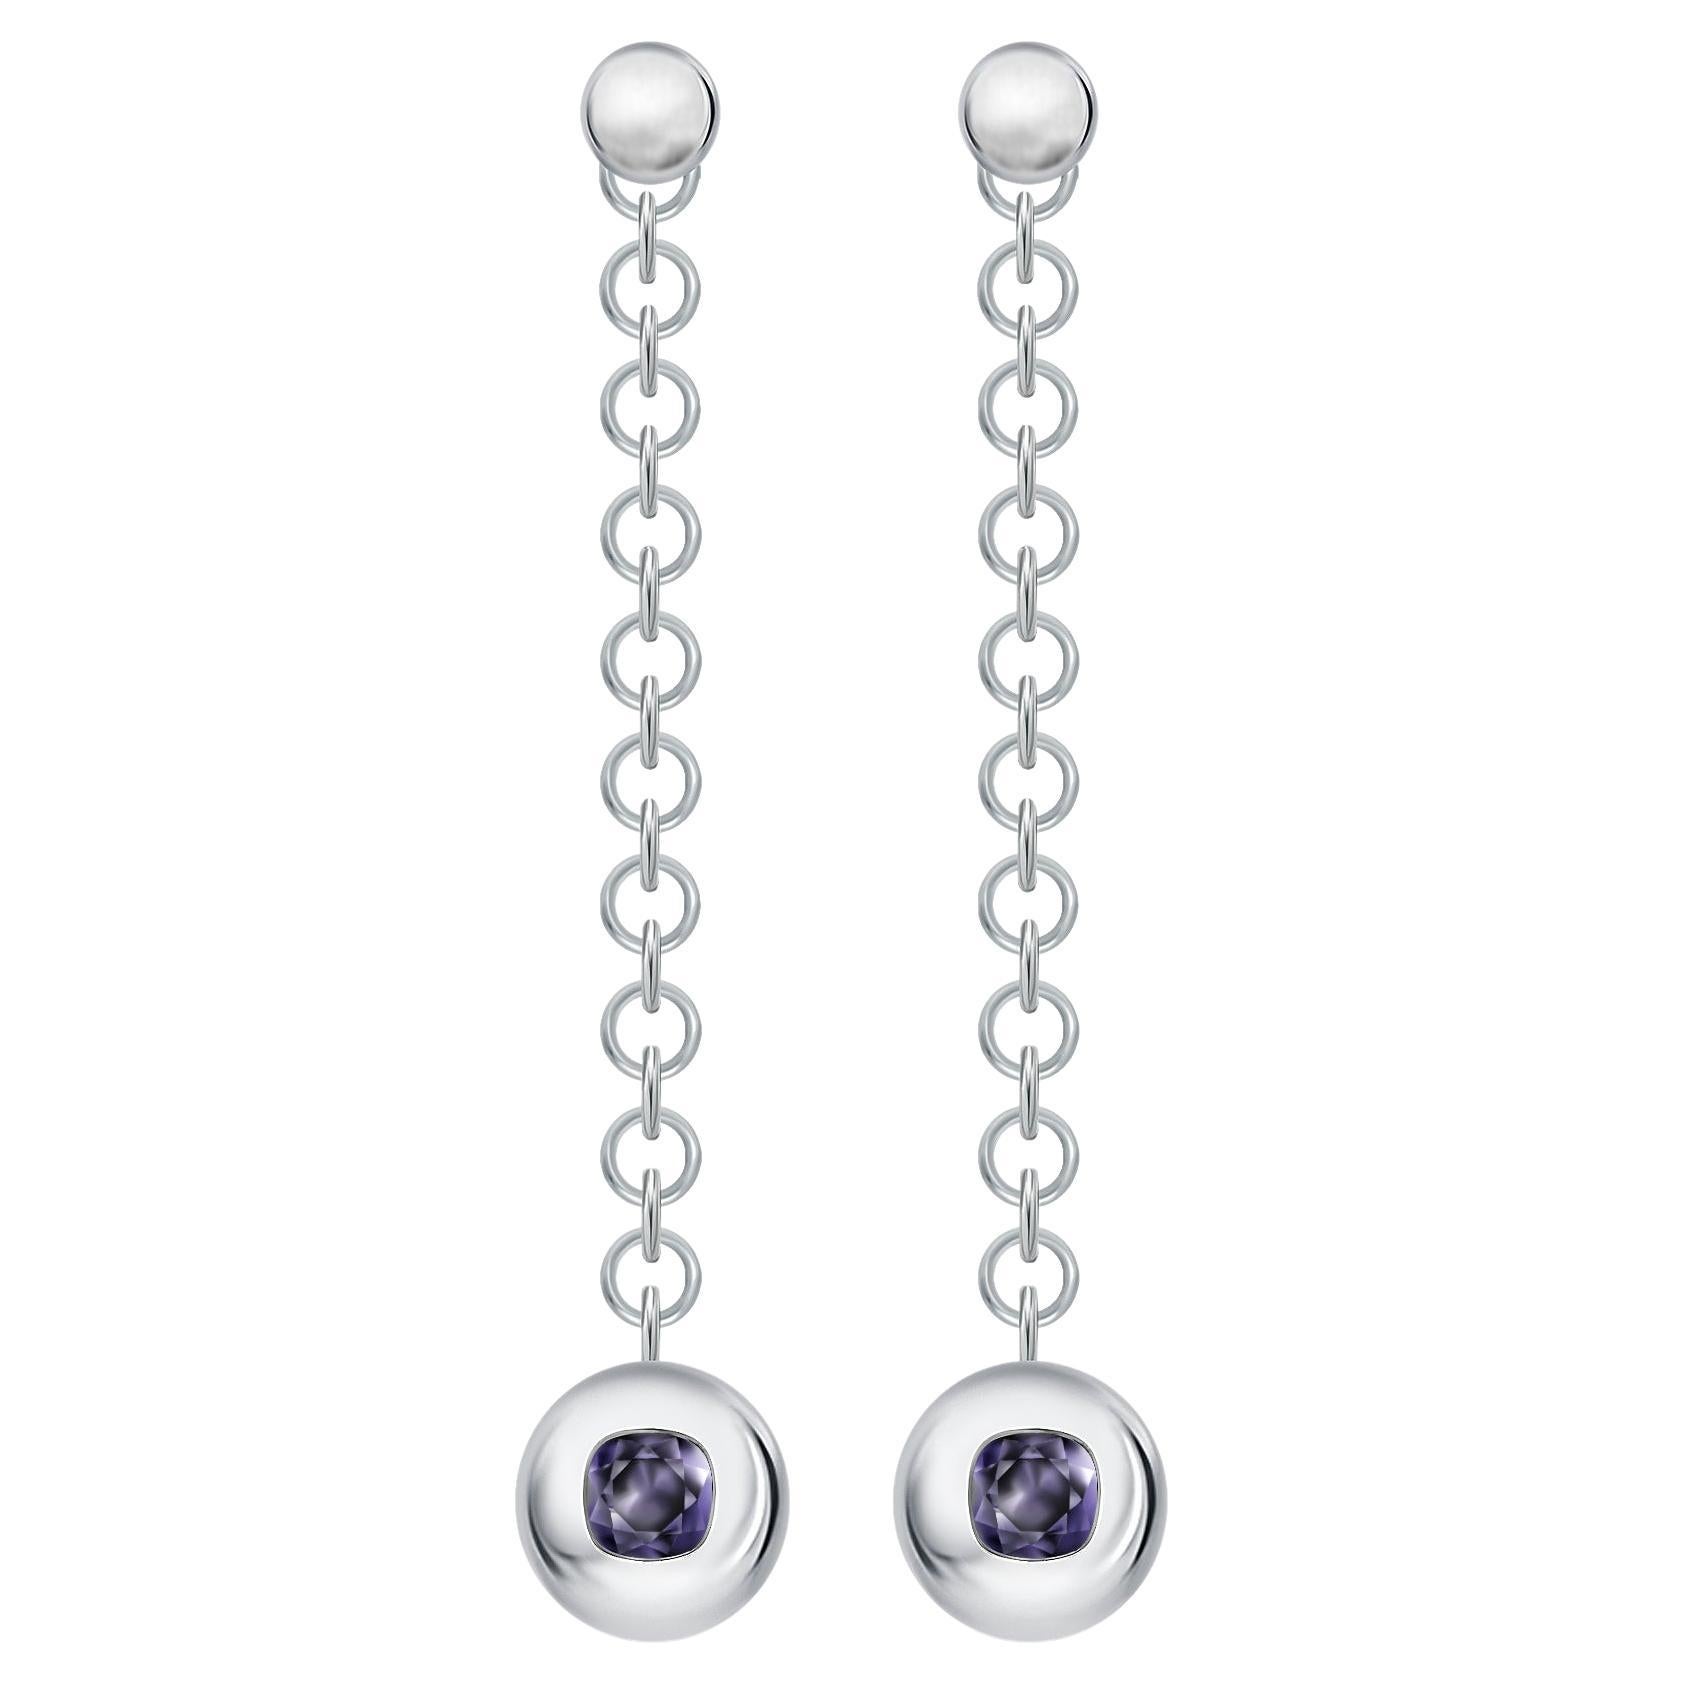 1,4 Carat Spinel 18 Karat White Gold Ball Earrings "Motion" Collection by D&A